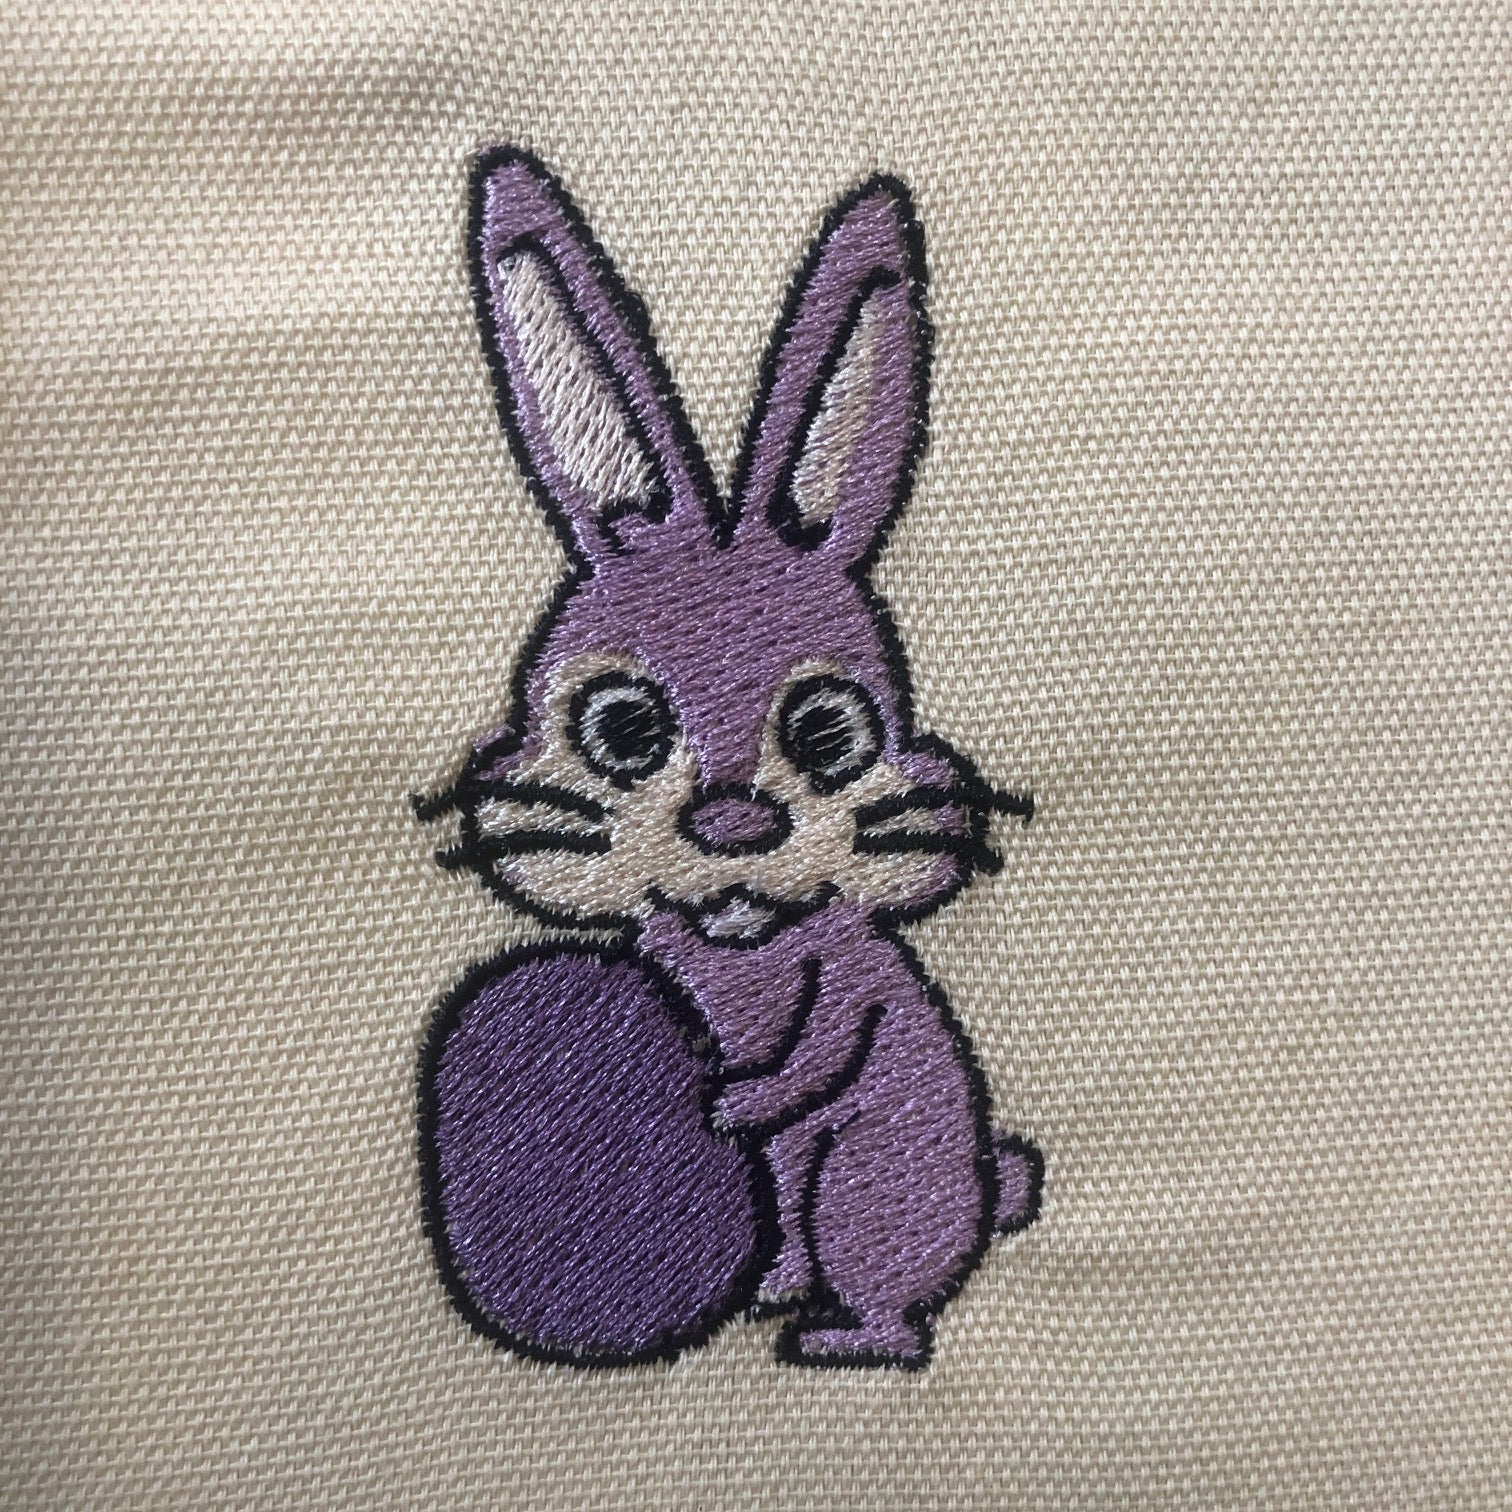 Easter Bunny Embroidery Design